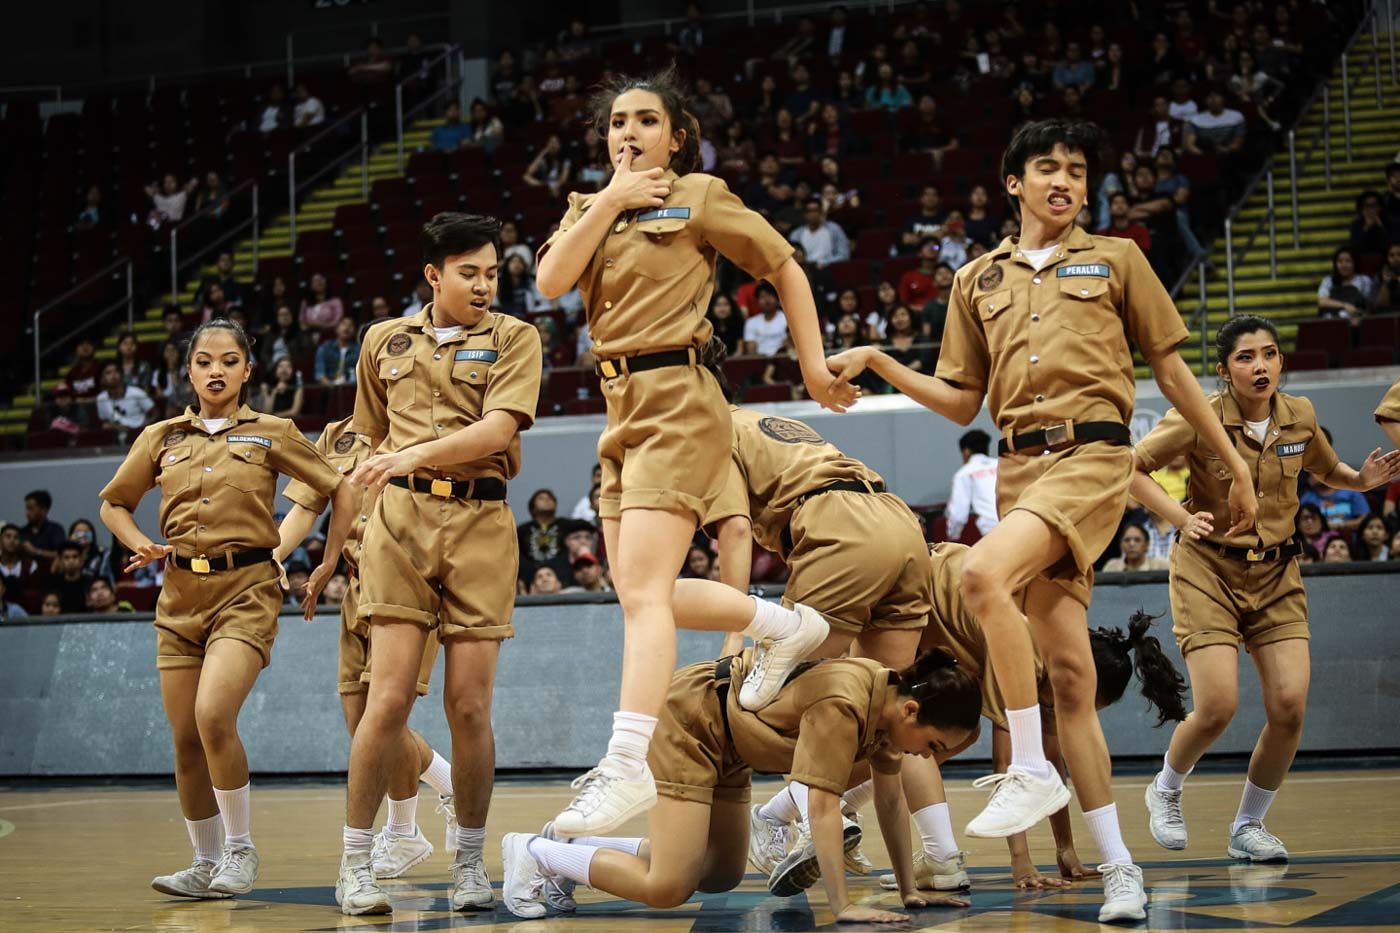 STREETDANCE. Members of the UST Prime perform during the UAAP 80 Streetdance competition at the Mall of Asia Arena on March 11, 2018. Photo by Josh Albelda/Rappler  